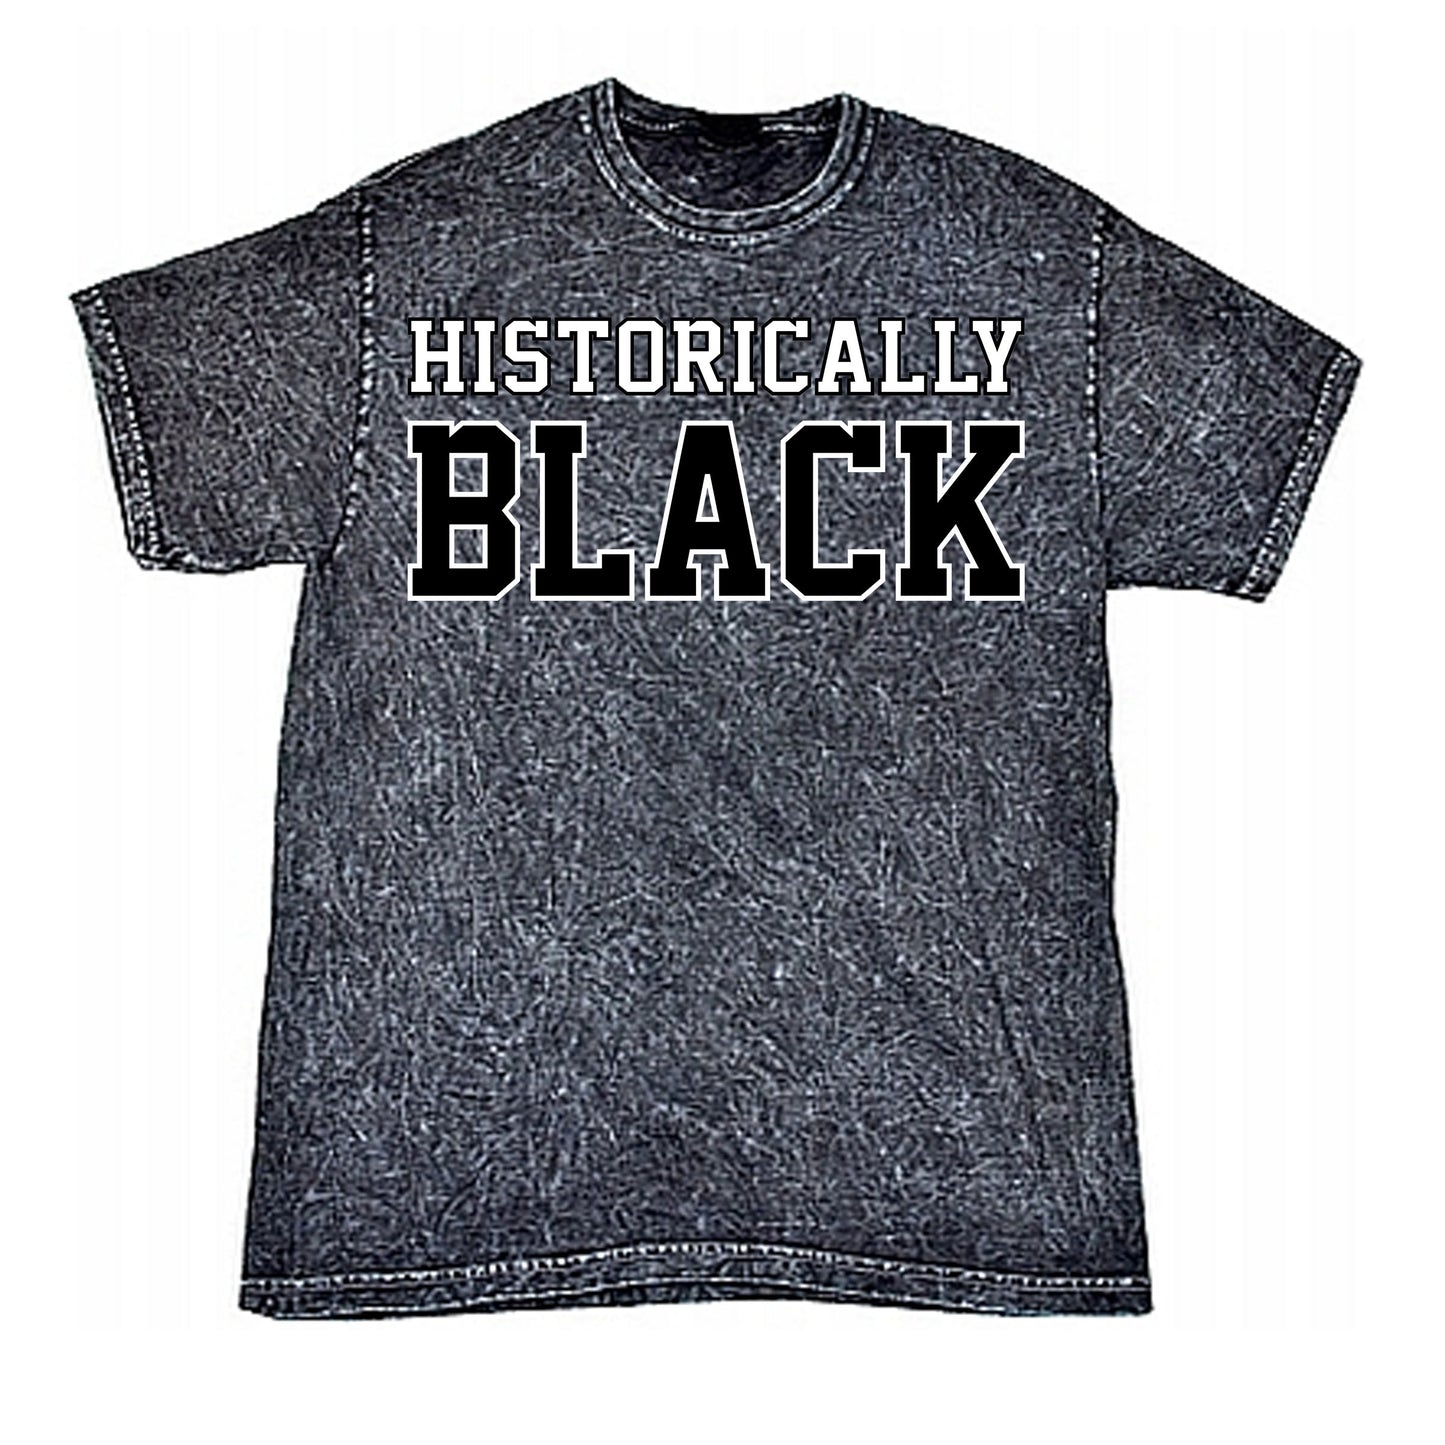 Historically Black Mineral Washed Tee - Black